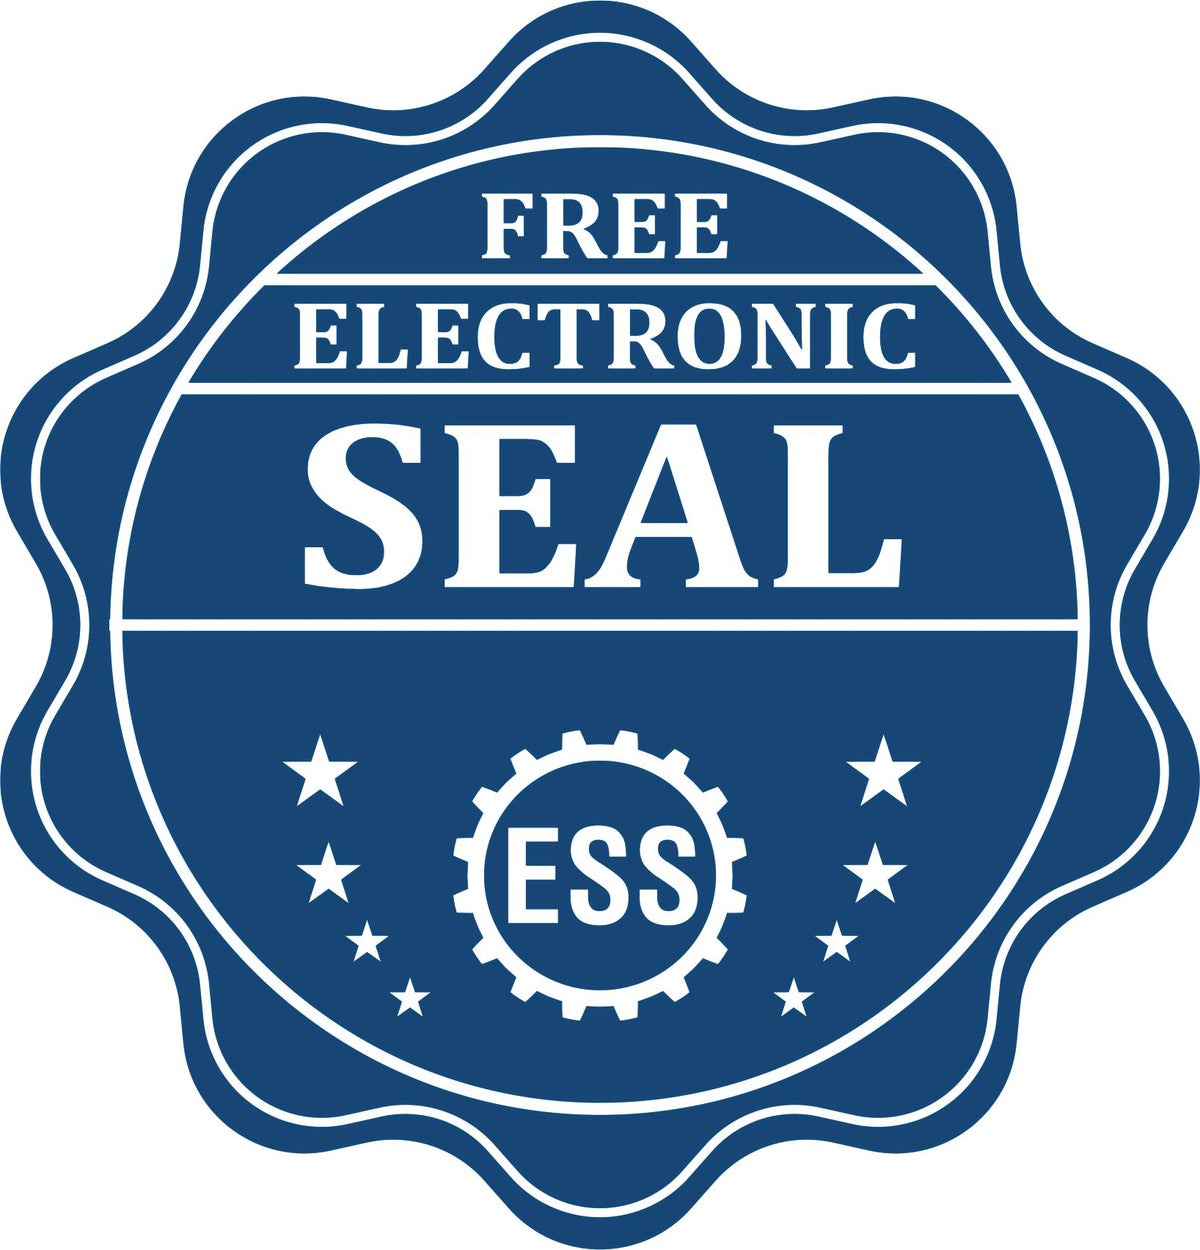 A badge showing a free electronic seal for the Soft Kansas Professional Engineer Seal with stars and the ESS gear on the emblem.